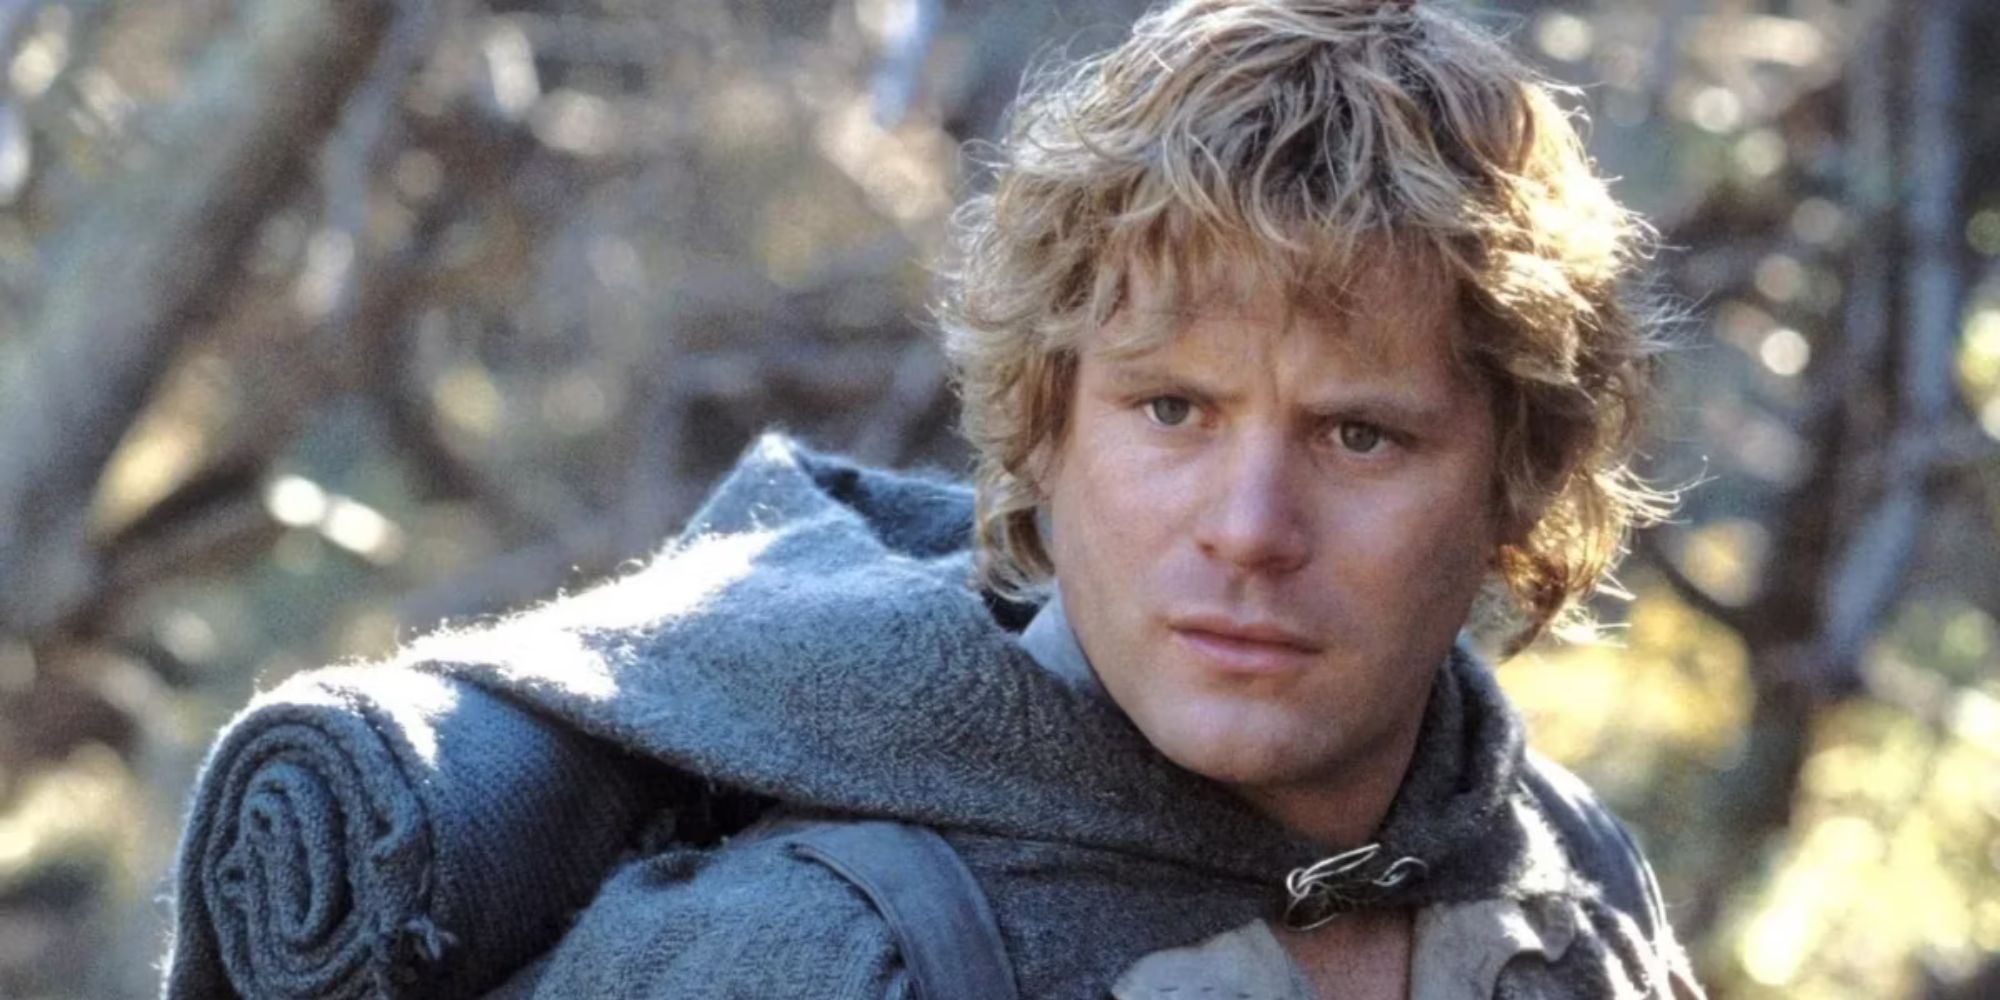 Sean Astin as Samwise Gamgee looking confused in The Lord of the Rings: The Fellowship of the Ring.